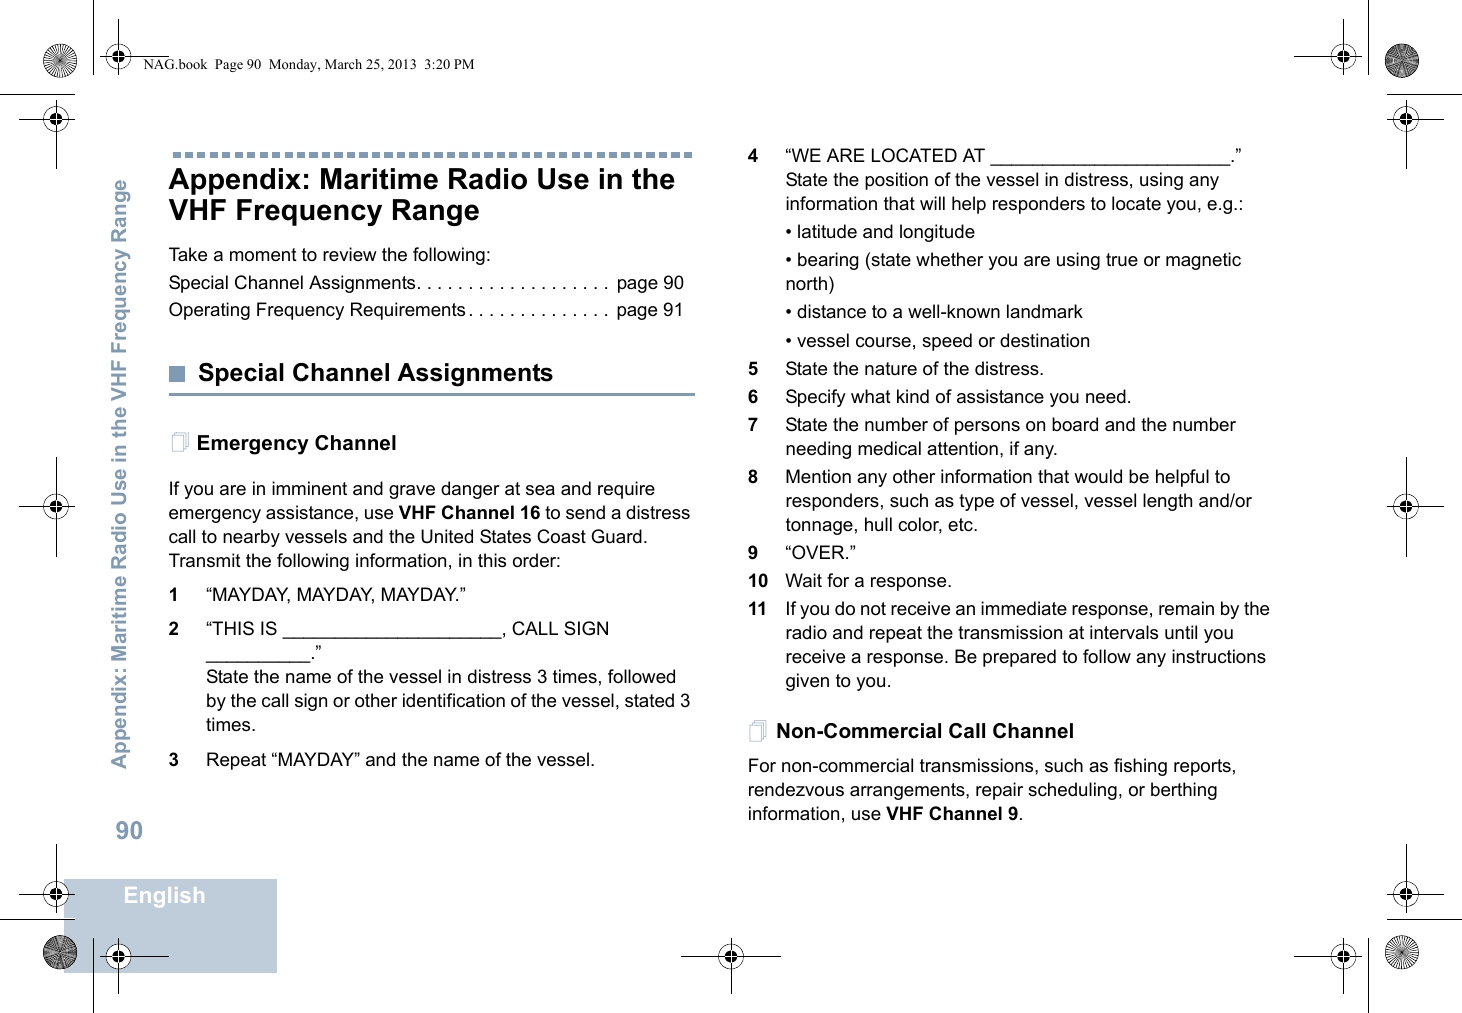 Appendix: Maritime Radio Use in the VHF Frequency RangeEnglish90Appendix: Maritime Radio Use in the VHF Frequency RangeTake a moment to review the following:Special Channel Assignments. . . . . . . . . . . . . . . . . . .  page 90Operating Frequency Requirements . . . . . . . . . . . . . .  page 91Special Channel AssignmentsEmergency ChannelIf you are in imminent and grave danger at sea and require emergency assistance, use VHF Channel 16 to send a distress call to nearby vessels and the United States Coast Guard. Transmit the following information, in this order:1“MAYDAY, MAYDAY, MAYDAY.”2“THIS IS _____________________, CALL SIGN __________.”State the name of the vessel in distress 3 times, followed by the call sign or other identification of the vessel, stated 3 times.3Repeat “MAYDAY” and the name of the vessel.4“WE ARE LOCATED AT _______________________.” State the position of the vessel in distress, using any information that will help responders to locate you, e.g.:• latitude and longitude• bearing (state whether you are using true or magnetic north)• distance to a well-known landmark• vessel course, speed or destination5State the nature of the distress.6Specify what kind of assistance you need.7State the number of persons on board and the number needing medical attention, if any.8Mention any other information that would be helpful to responders, such as type of vessel, vessel length and/or tonnage, hull color, etc.9“OVER.”10 Wait for a response.11 If you do not receive an immediate response, remain by the radio and repeat the transmission at intervals until you receive a response. Be prepared to follow any instructions given to you.Non-Commercial Call ChannelFor non-commercial transmissions, such as fishing reports, rendezvous arrangements, repair scheduling, or berthing information, use VHF Channel 9.NAG.book  Page 90  Monday, March 25, 2013  3:20 PM